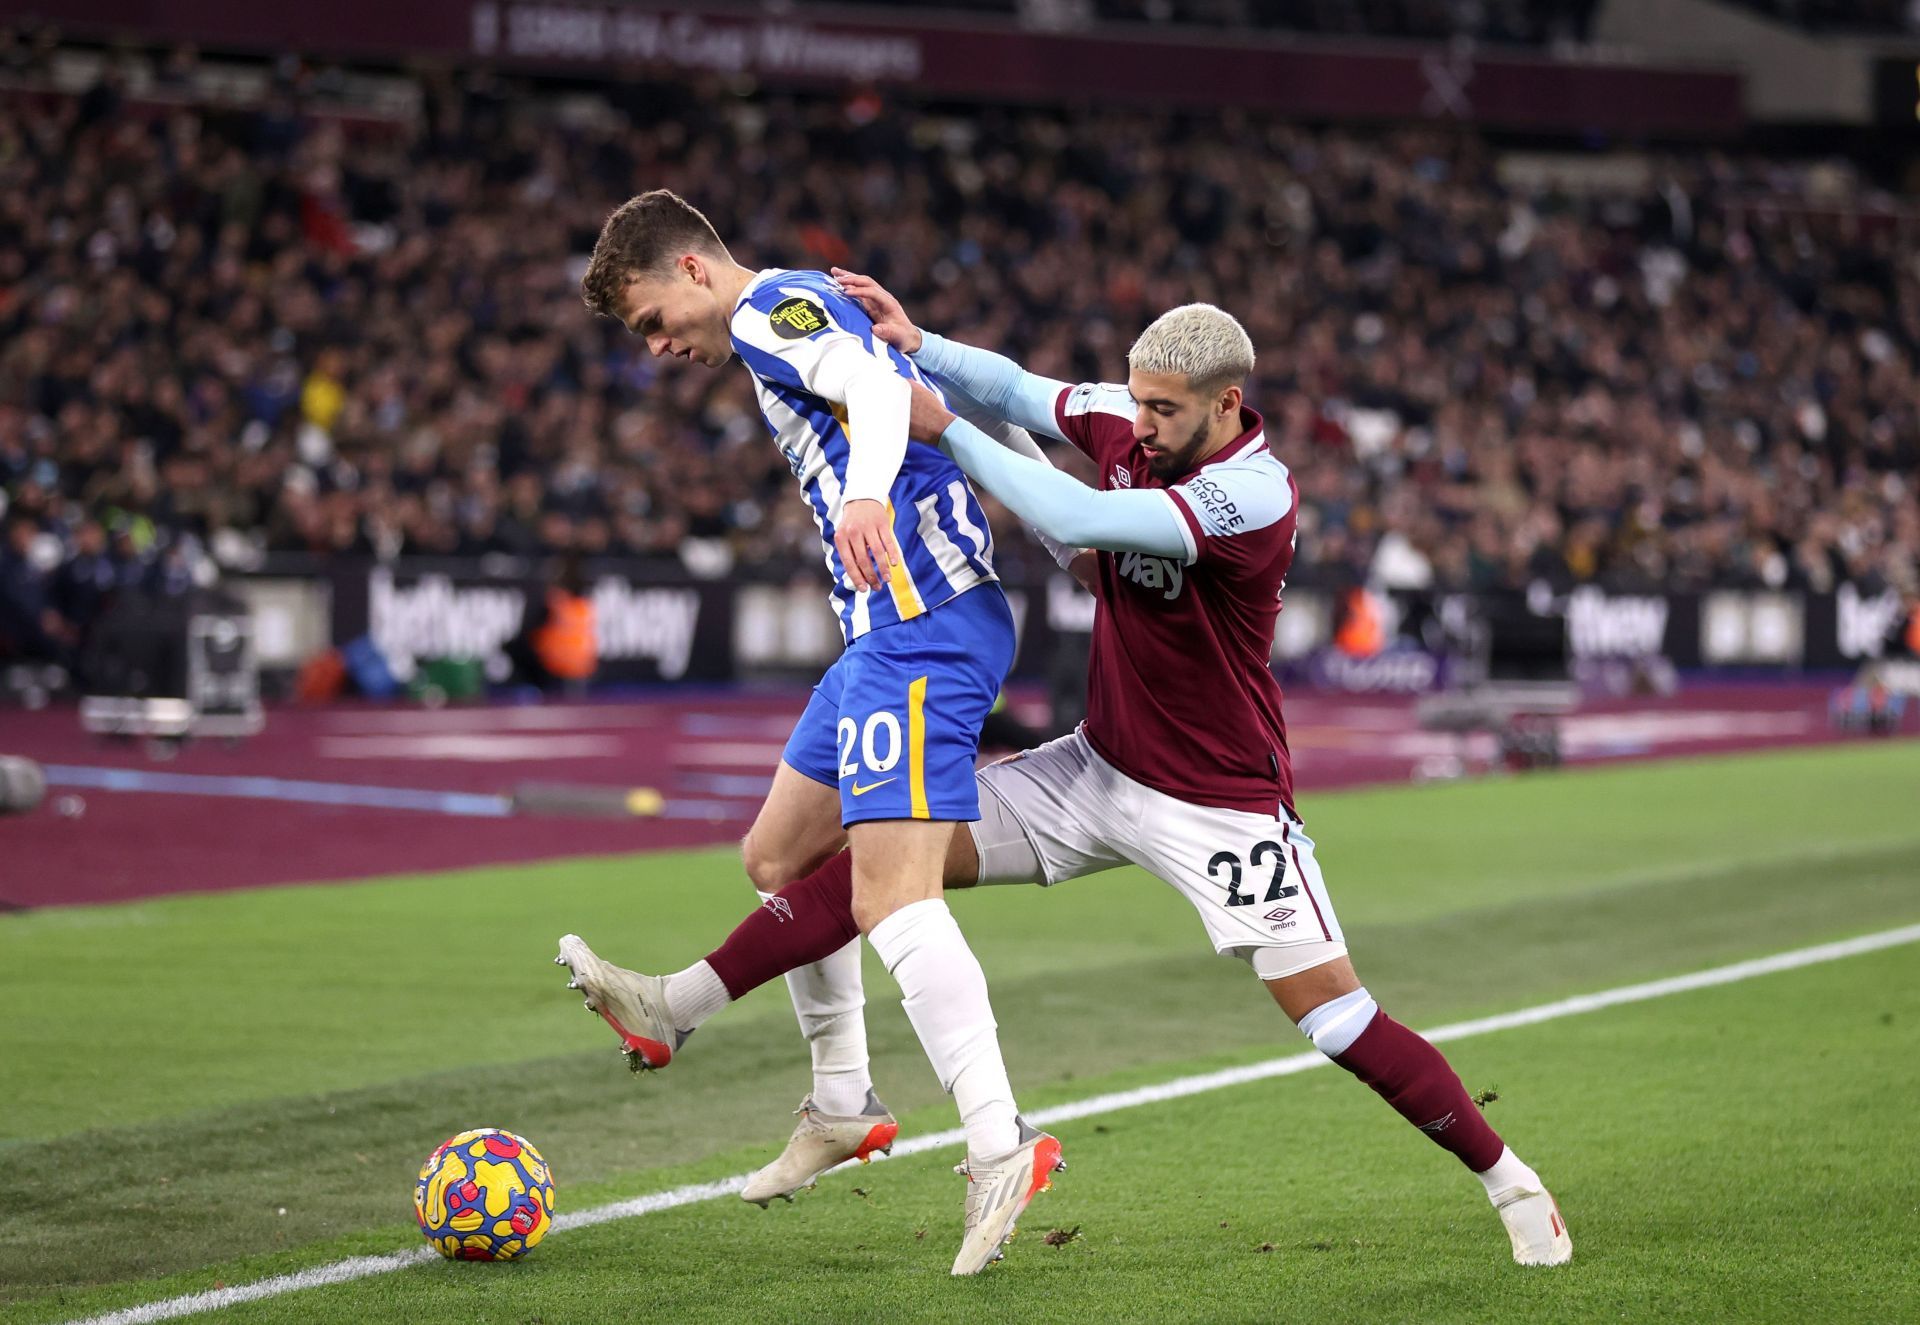 Brighton &amp; Hove Albion host West Ham United in their final Premier League fixture of the season